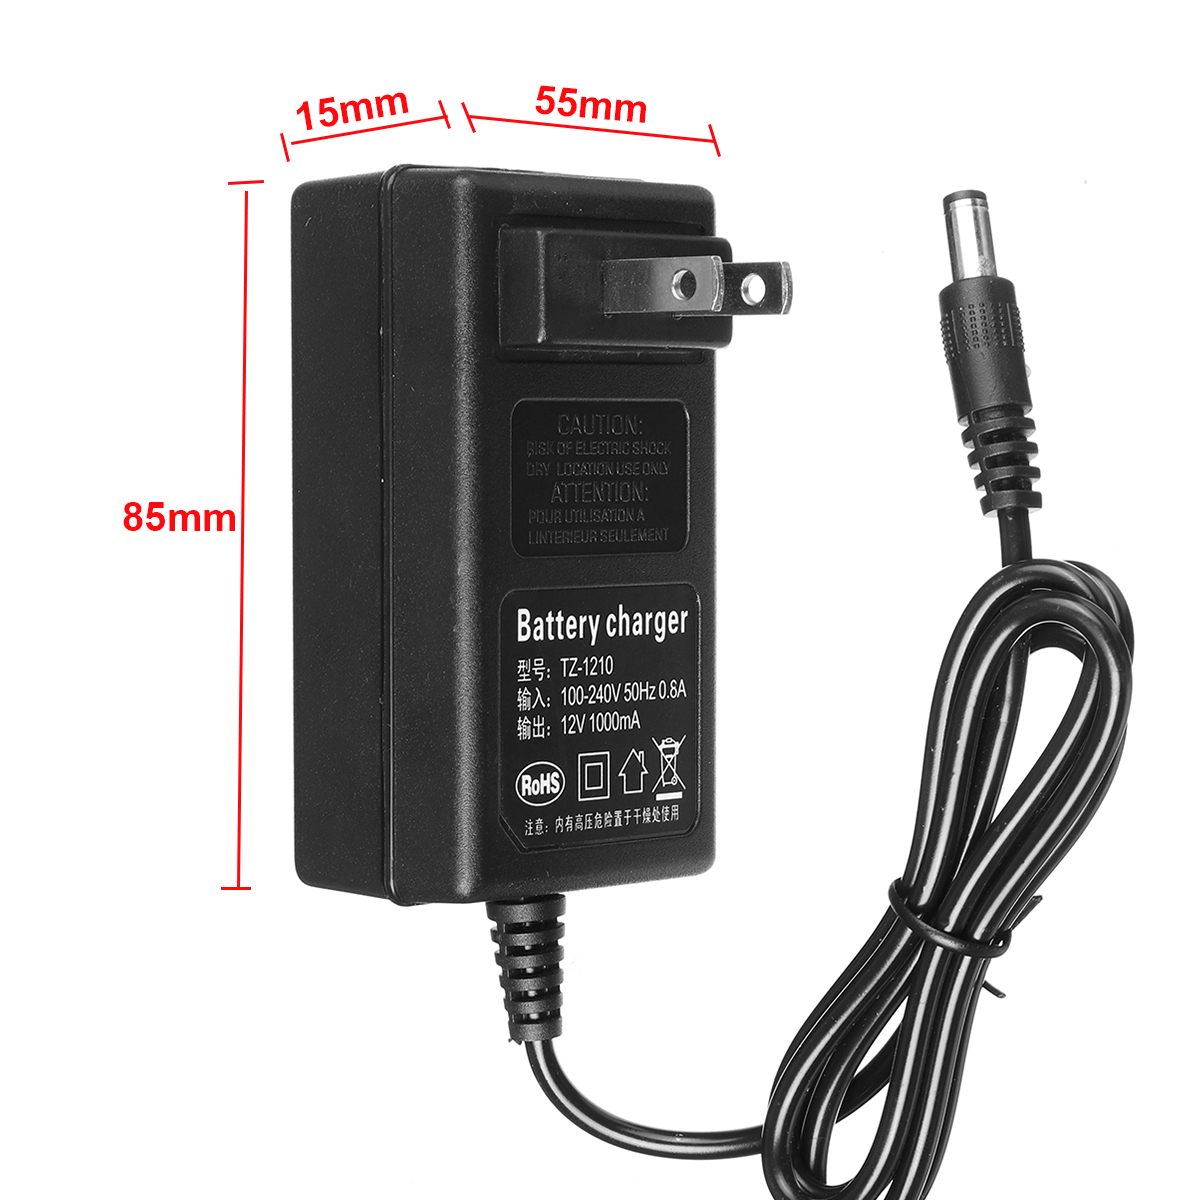 AC-100V-240V-50Hz-06A-Input-12V-1000mAh-Output-Battery-Charger-for-Makita-Electric-Drill-General-Bat-1794719-3